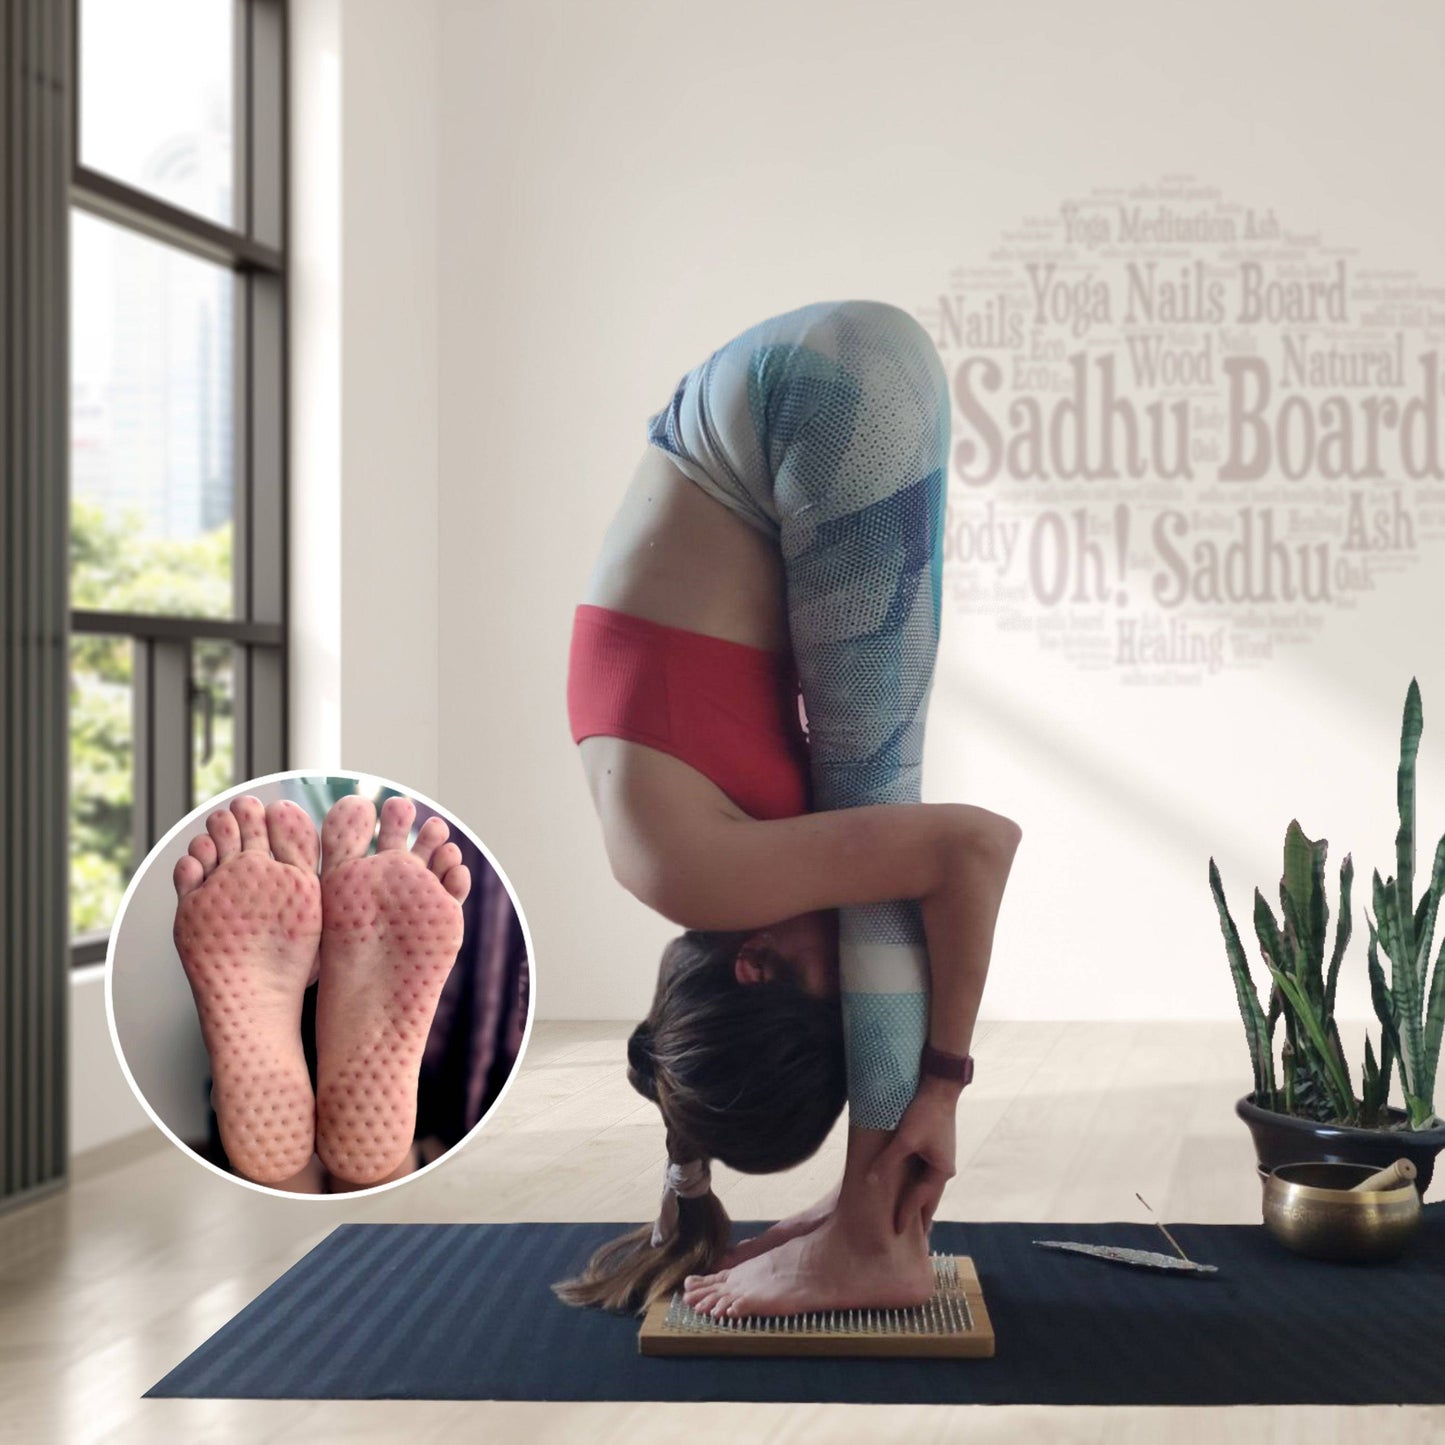 Yoga girl are standing on nails